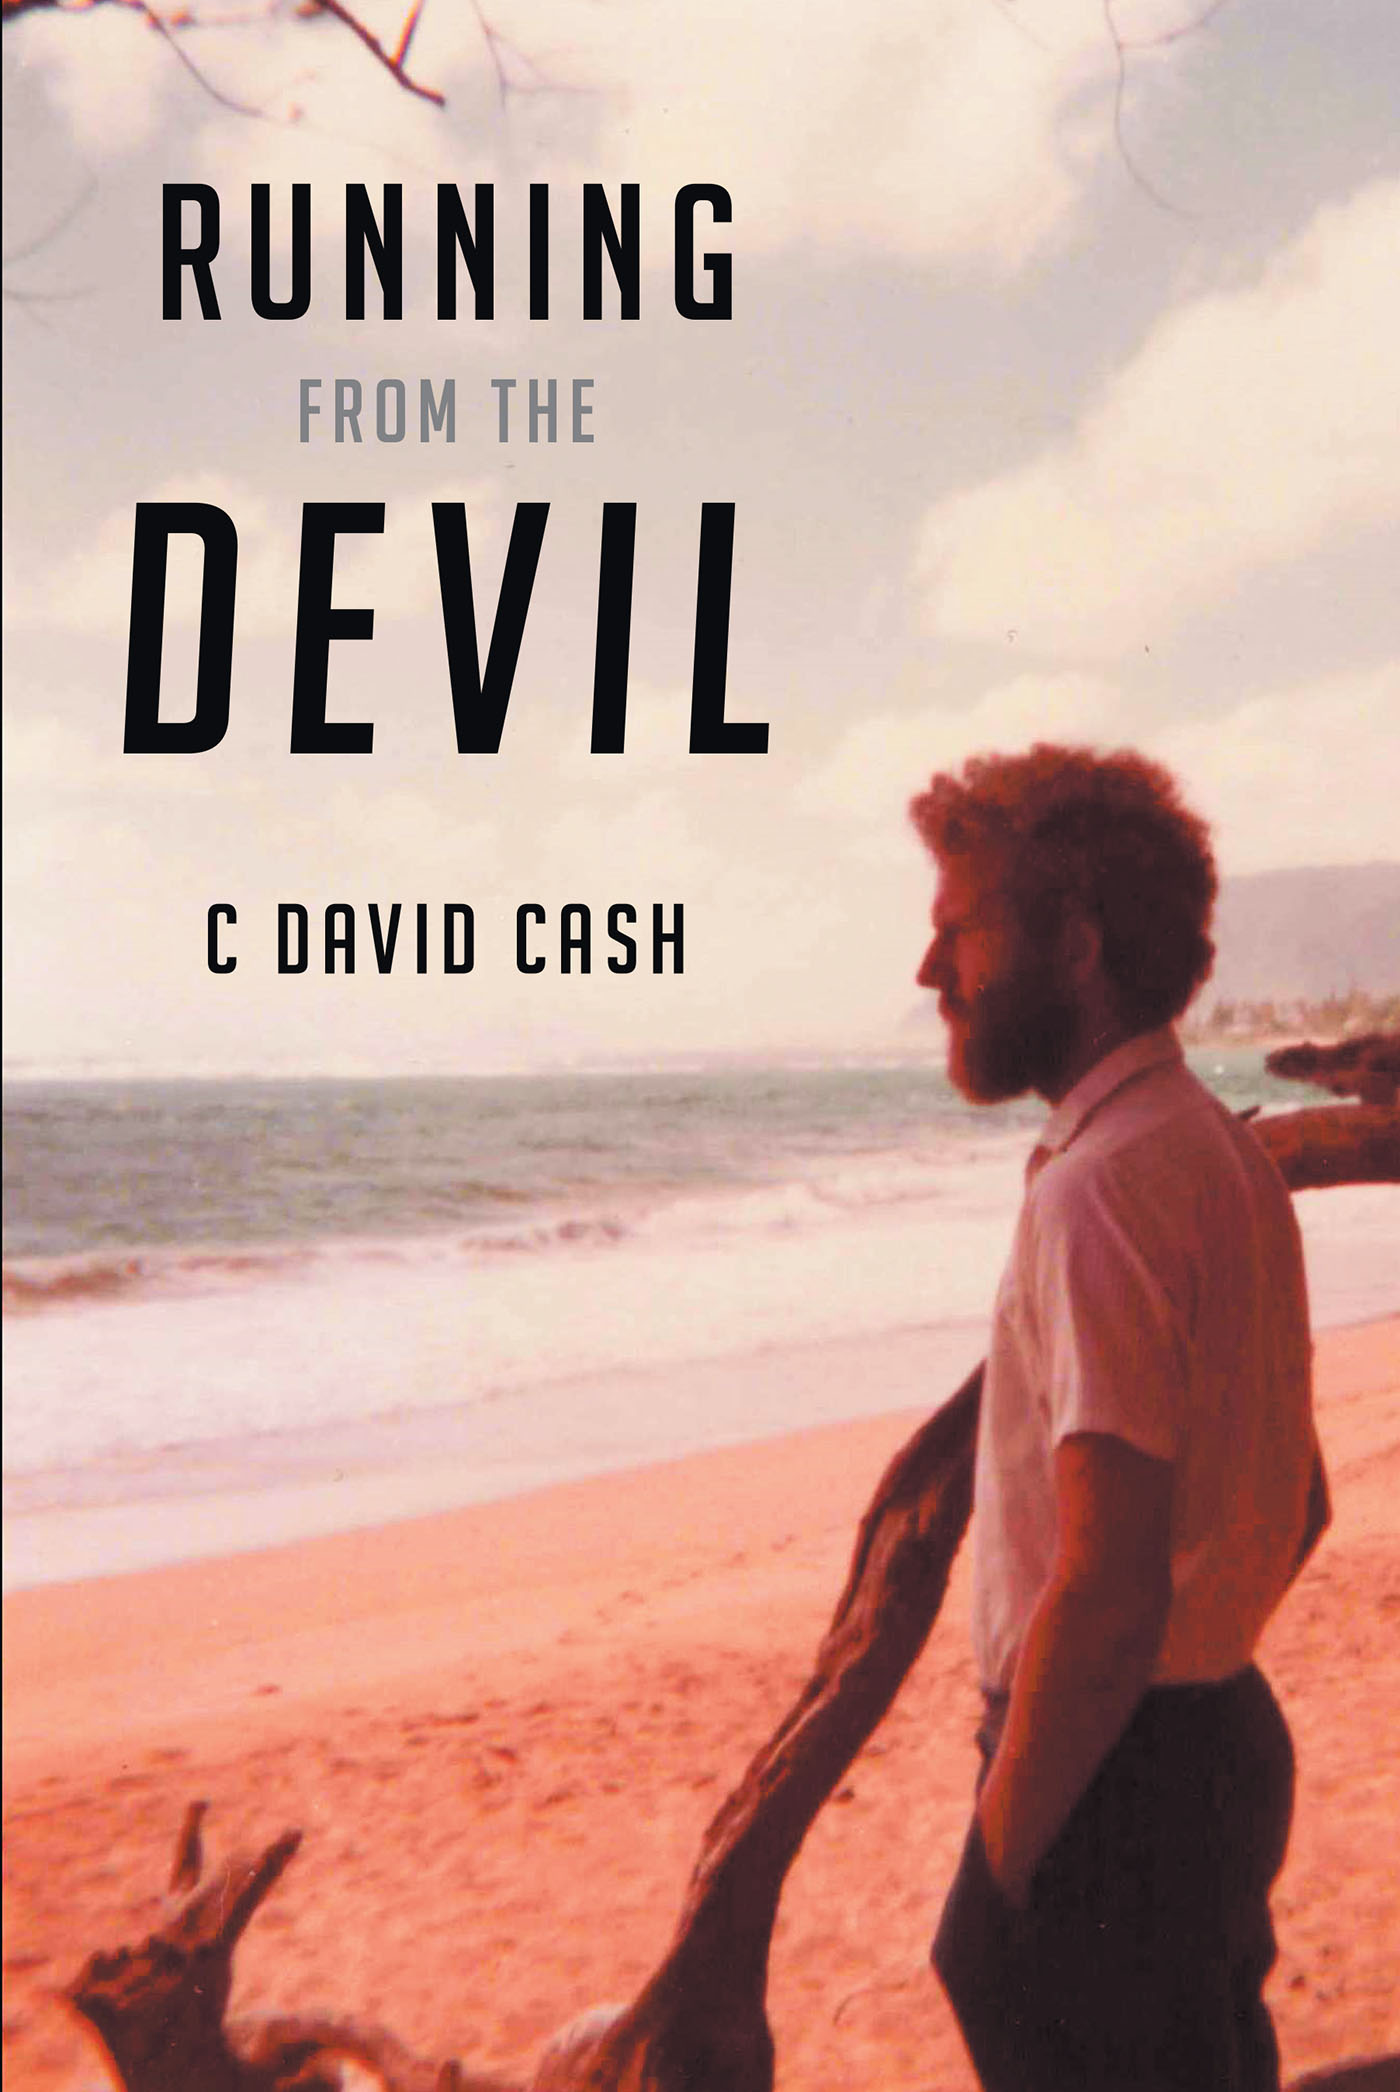 Author C David Cash’s New Book, "Running from the Devil," is a Wonderful True Story Recounting the Author’s Memorable Life Up to Thirty Years Old